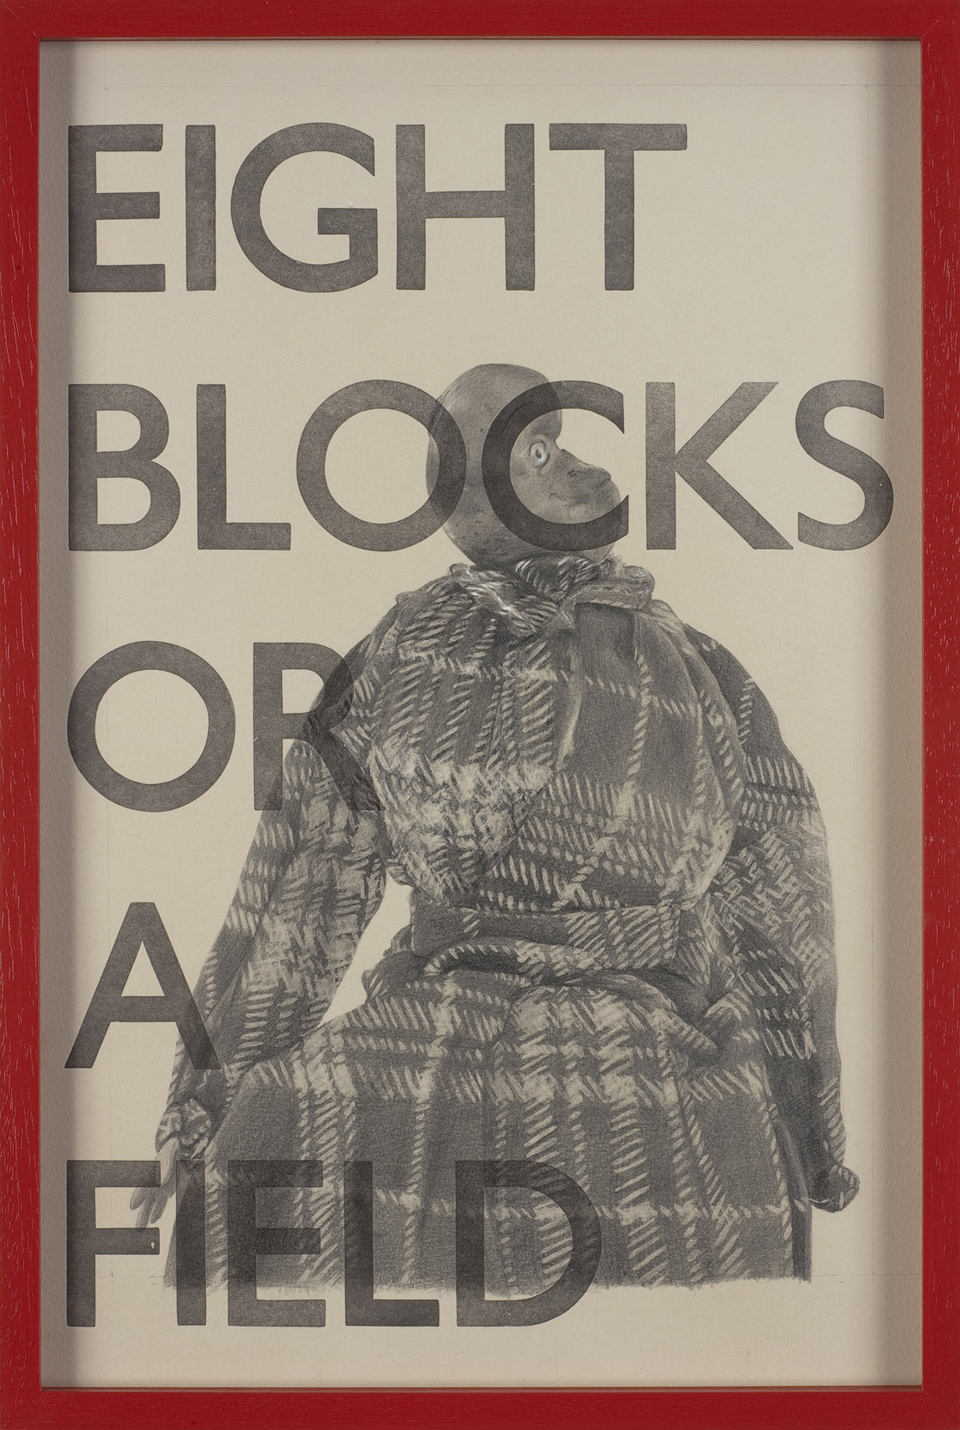 Eight Blocks or a Field website image